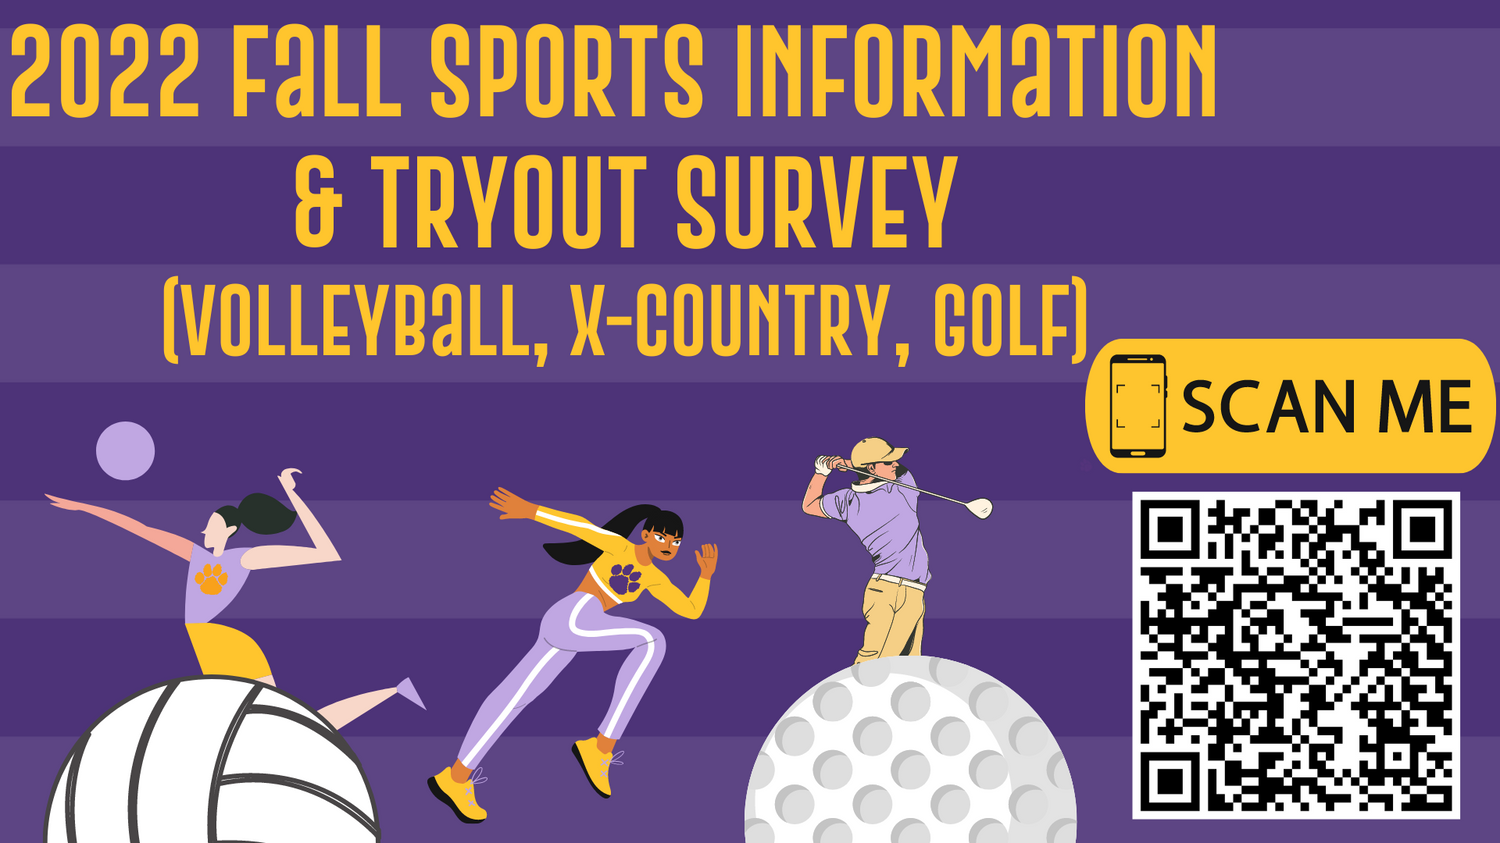 Sports try out information